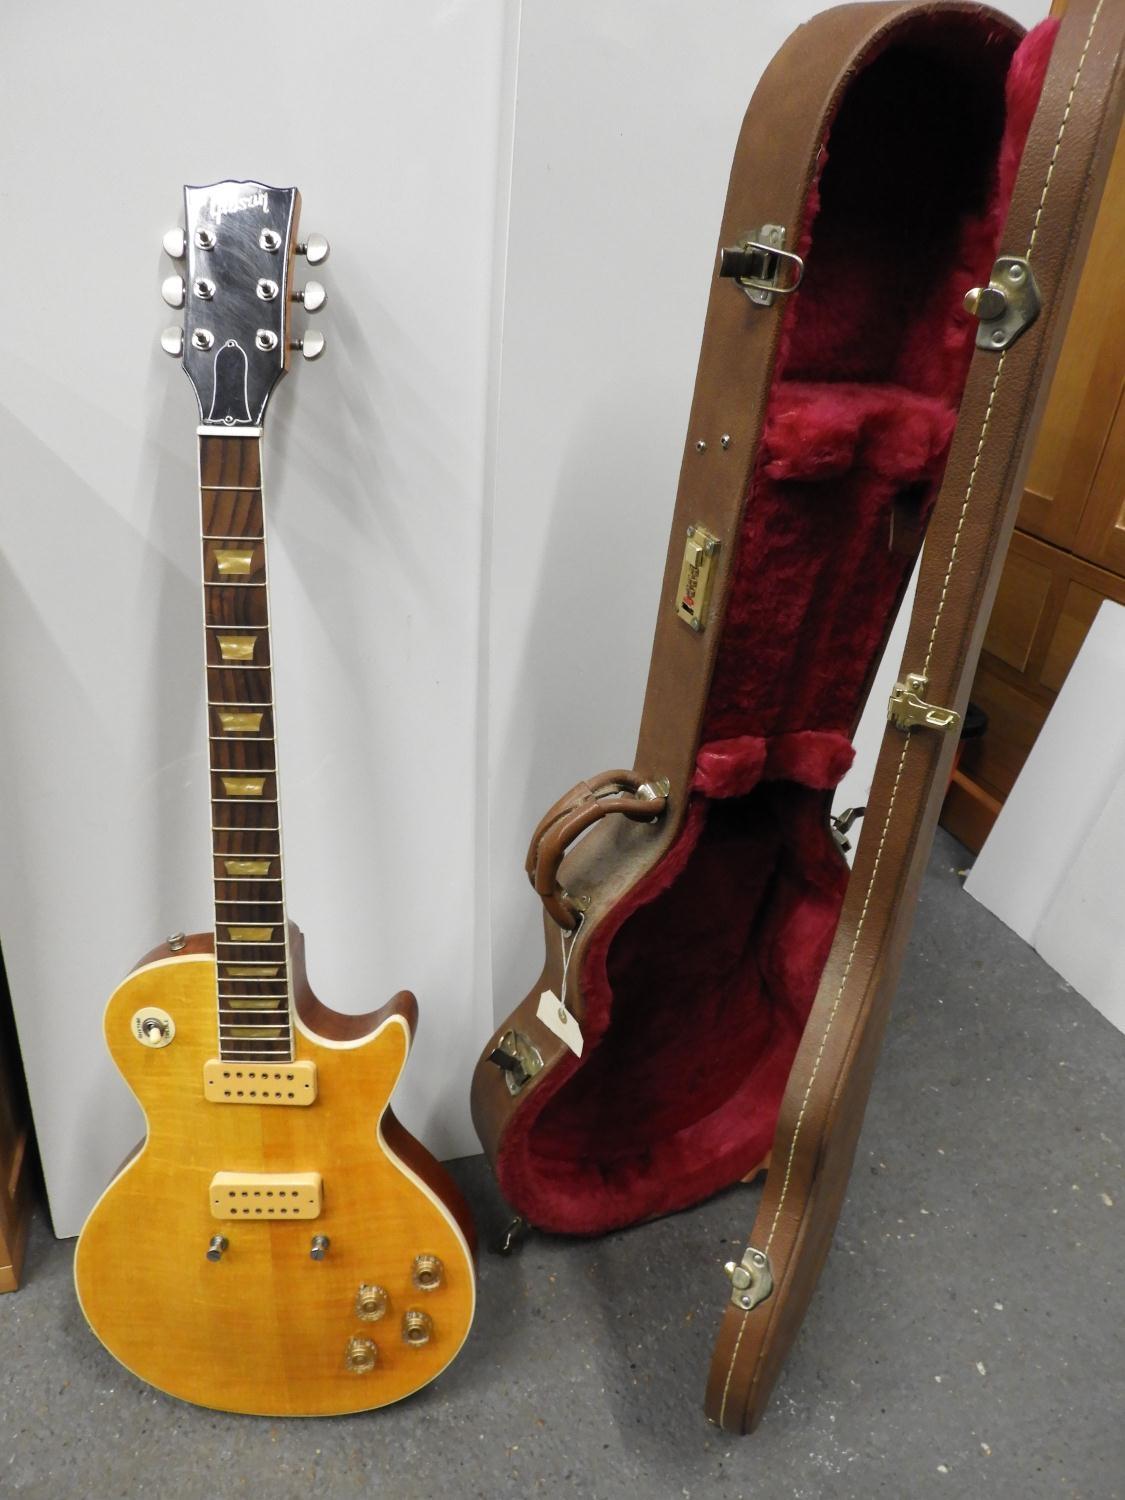 Electric Guitar Body in Case - Marked Gibson - NB: We Cannot Confirm Authenticity